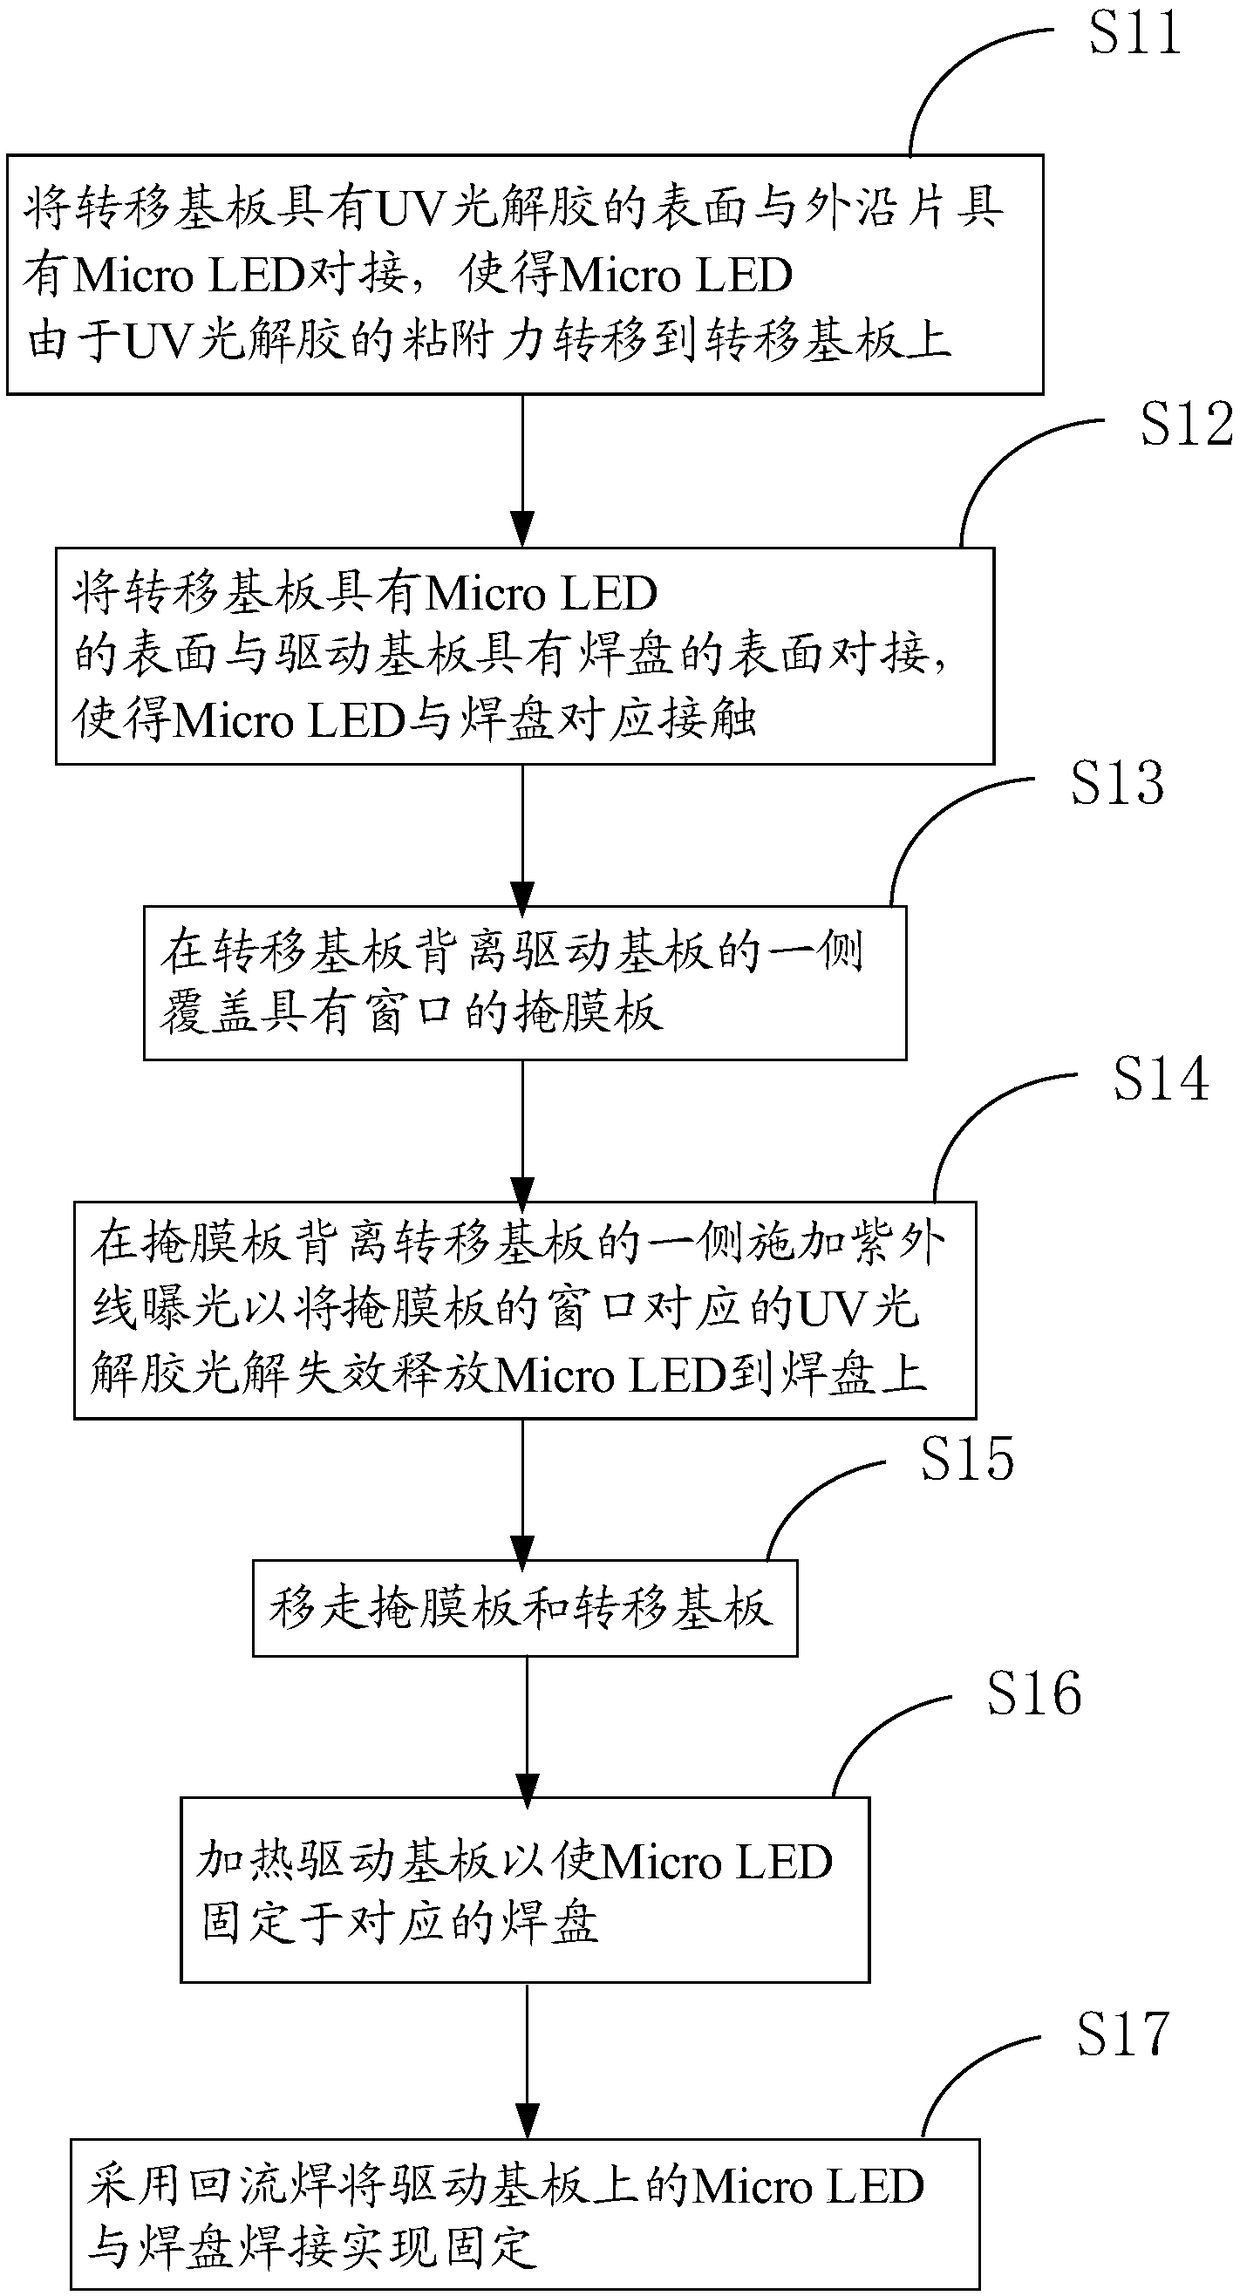 Manufacture method for Micro LED (Light Emitting Diode) display substrate